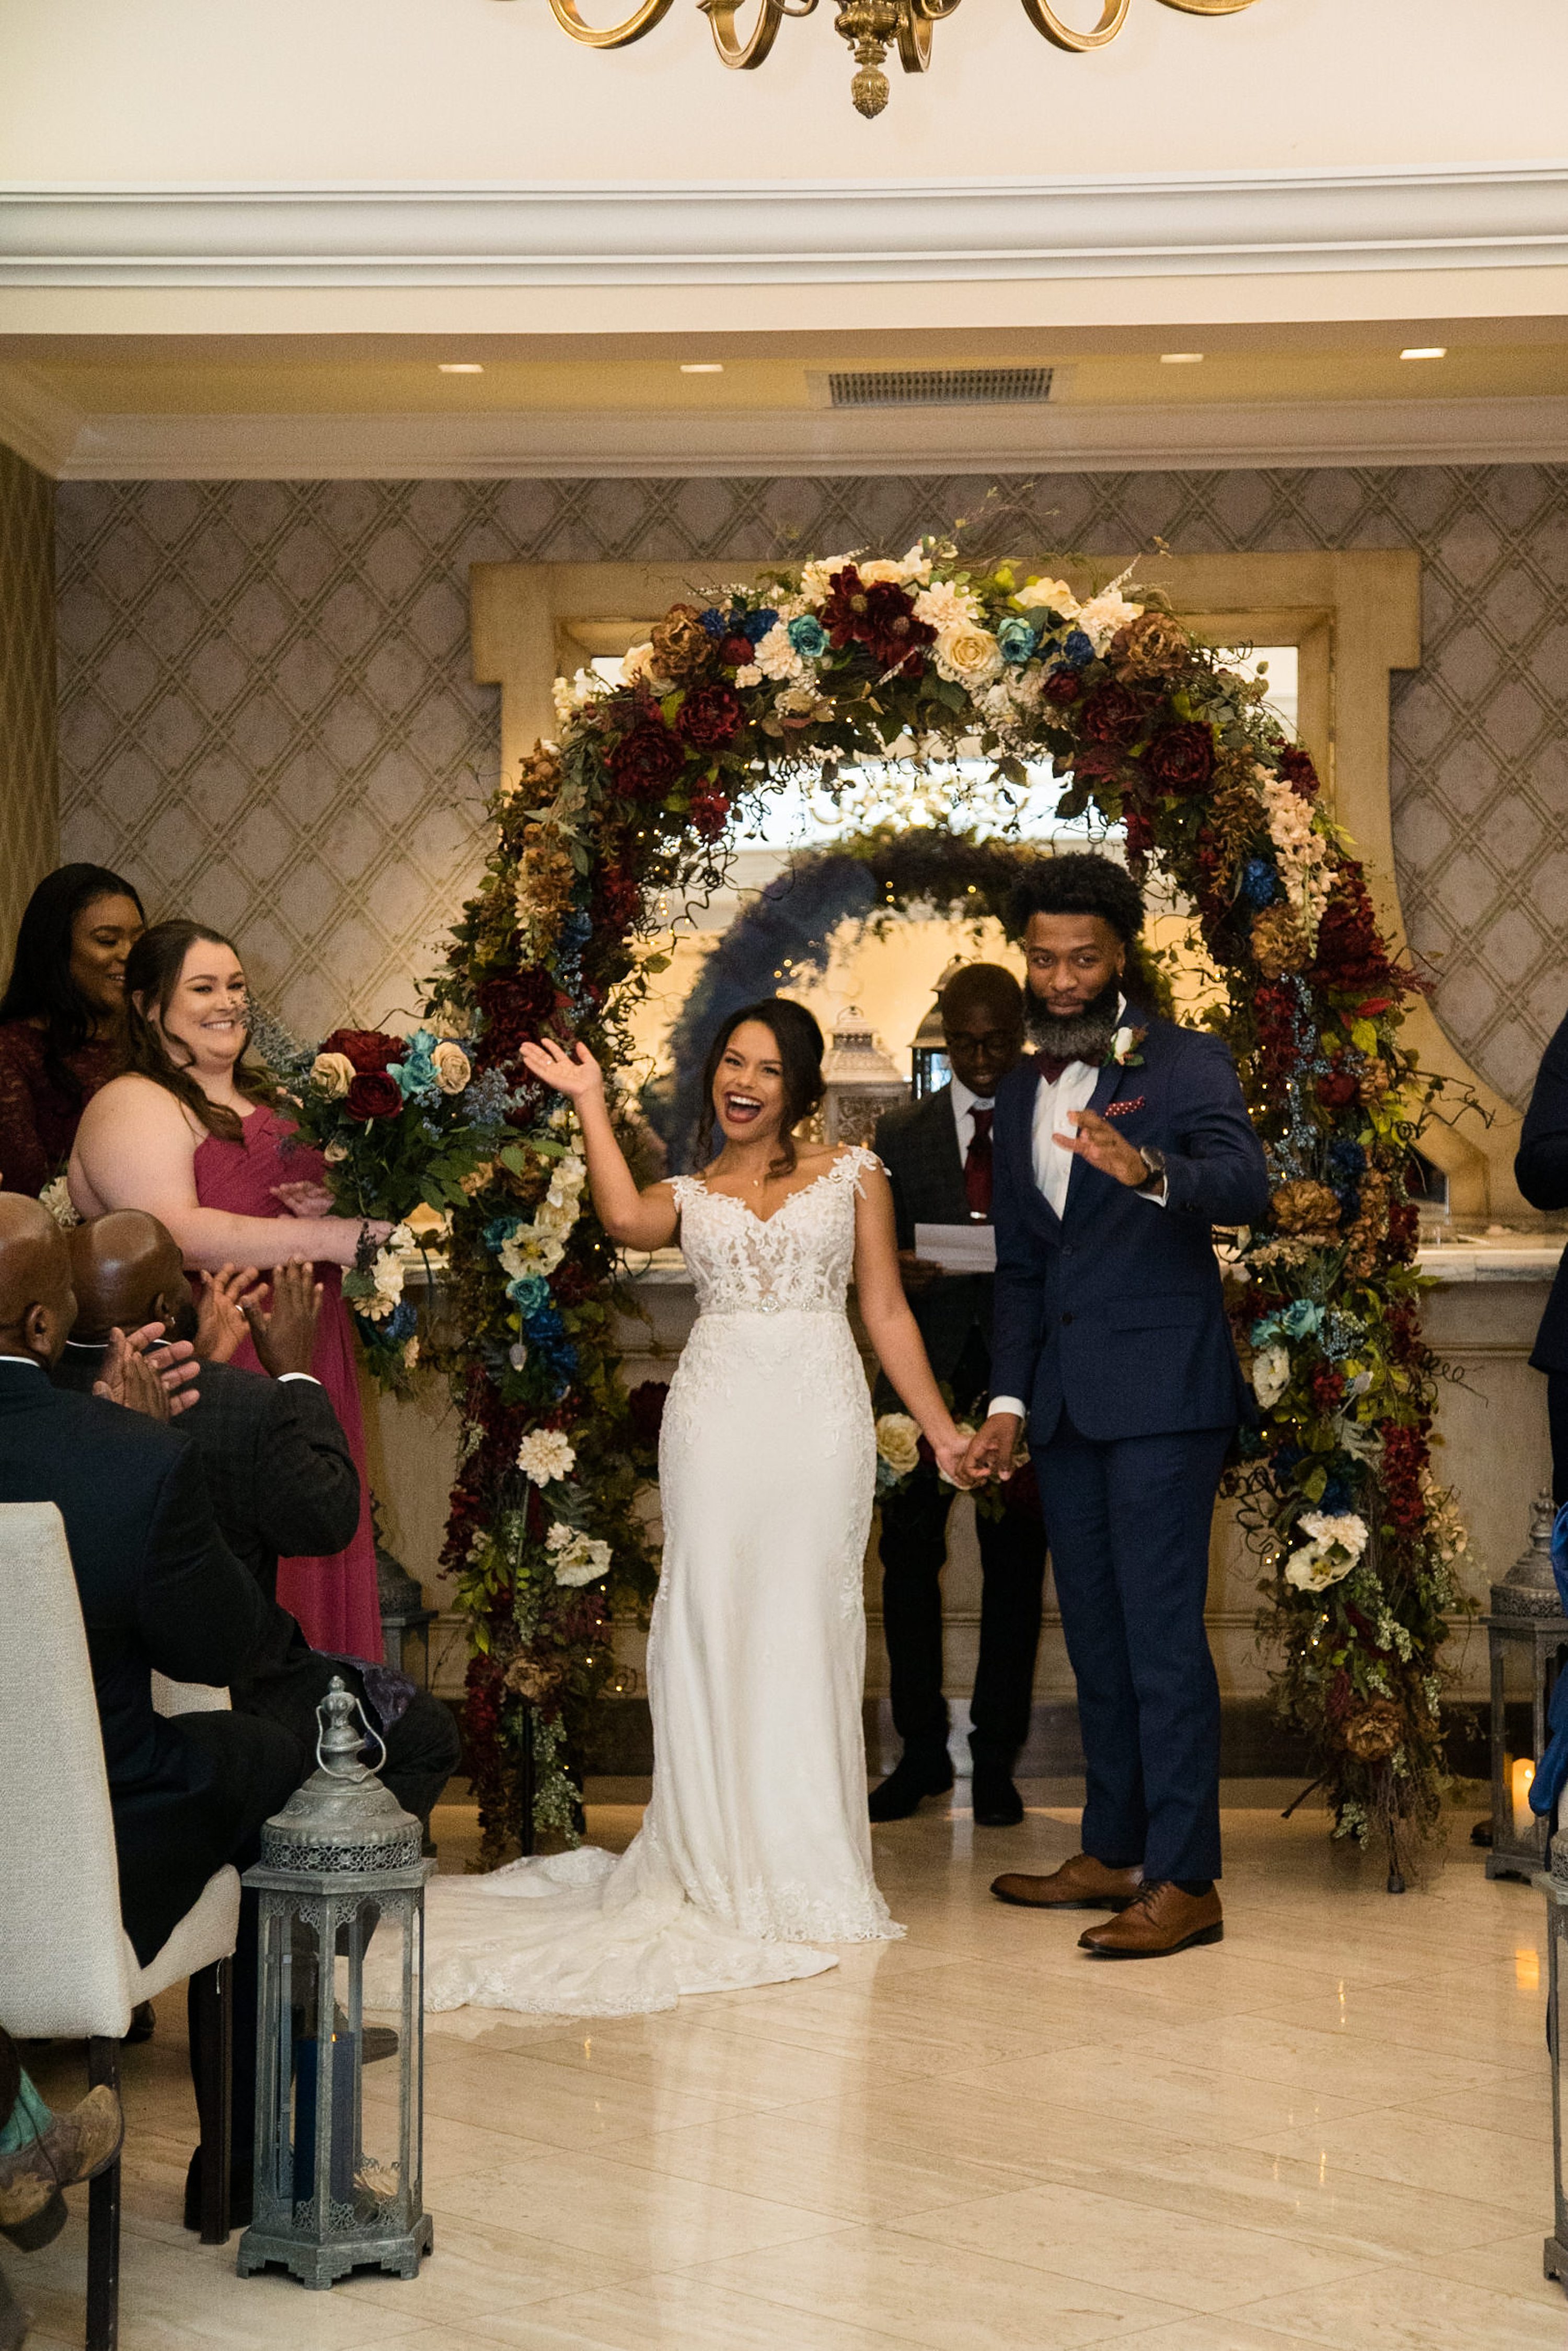  Darian and Holland's wedding at the Rosewood Mansion in Dallas